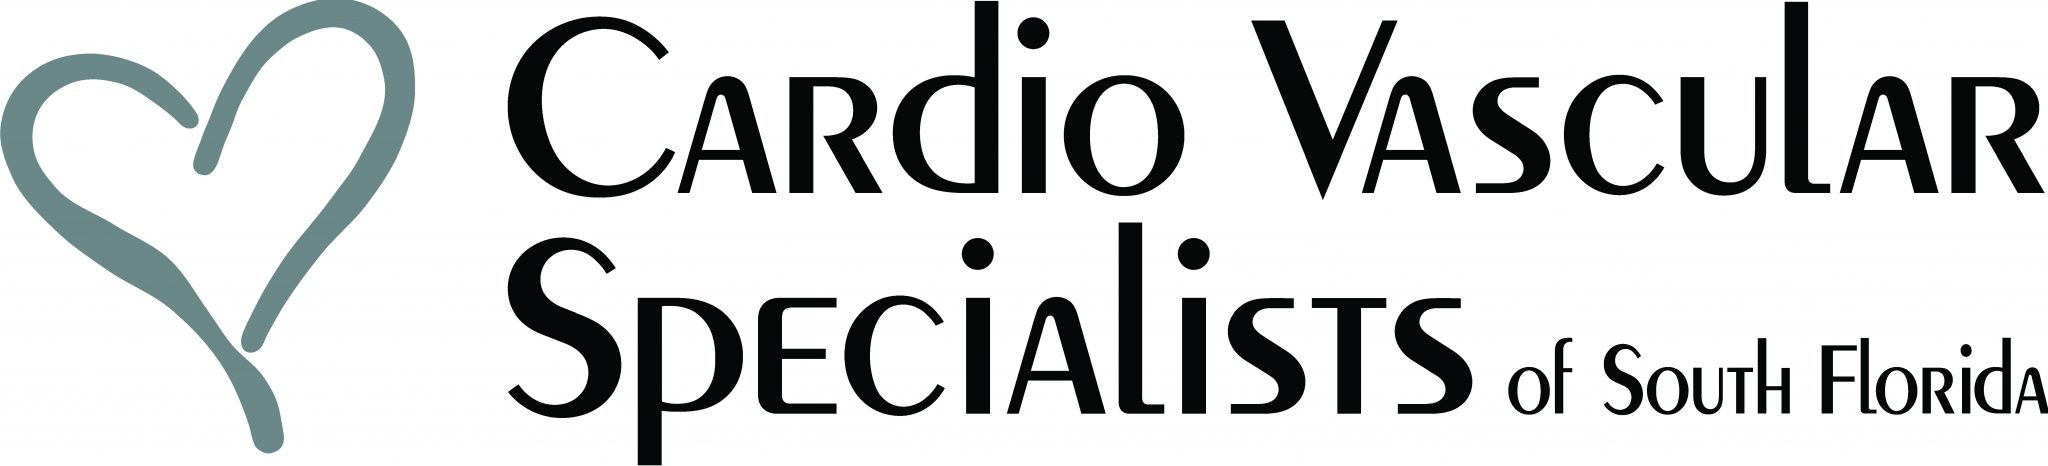 Cardio Vascular Specialists of South Florida